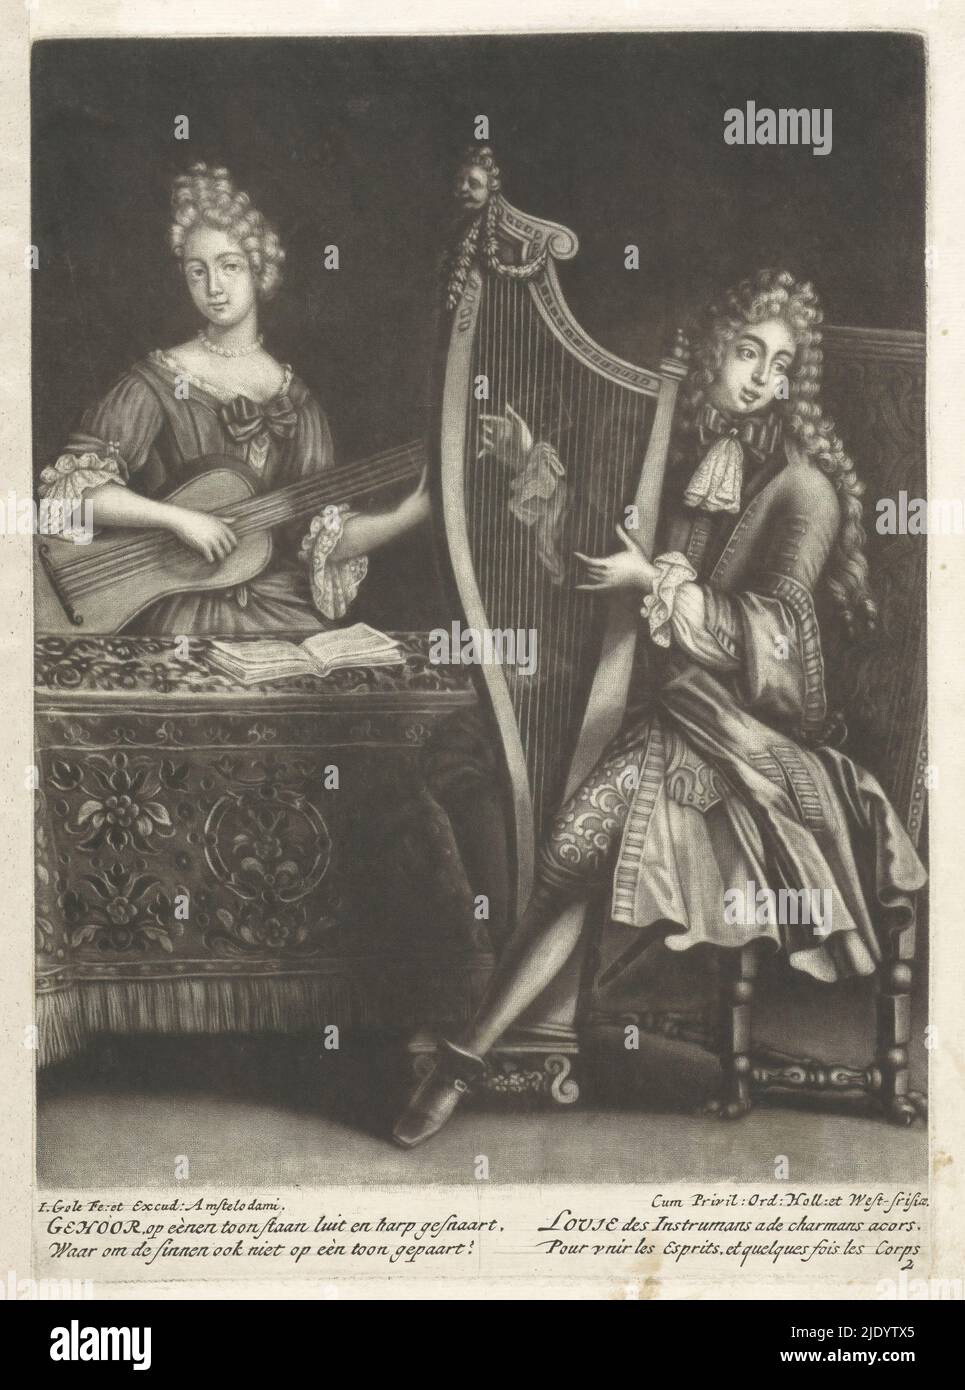 The Hearing, Hearing / Louie (title on object), The Five Senses, represented by elegant pairs of ladies and gentlemen (series title), A musician couple, fashionably dressed. The young man plays the harp and the woman the guitar. On the table is a music book. The print is part of a series featuring the five senses., print maker: Jacob Gole, (mentioned on object), publisher: Jacob Gole, (mentioned on object), Staten van Holland en West-Friesland, (mentioned on object), Amsterdam, 1700 - 1724, paper, engraving, height 251 mm × width 180 mm Stock Photo